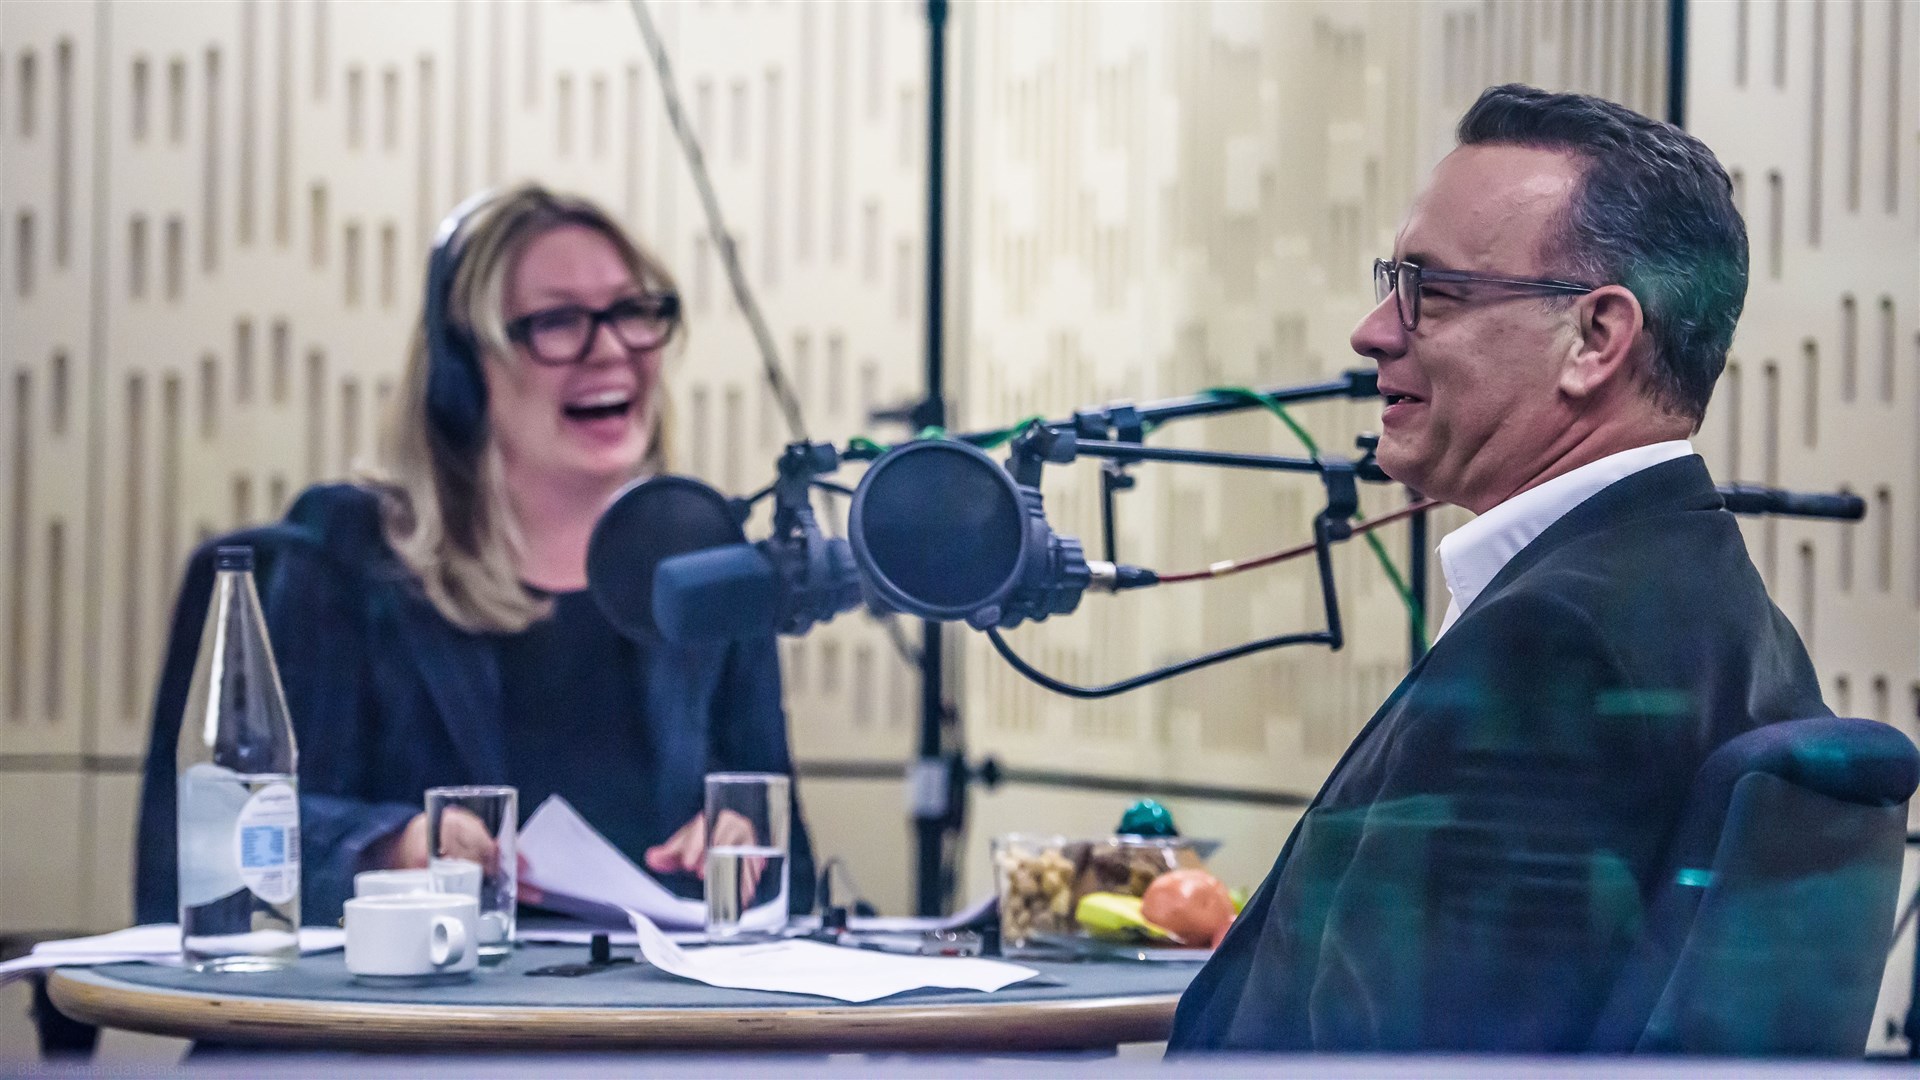 Kirsty Young interviewed 496 castaways during her time on the BBC Radio 4 show (BBC/PA)